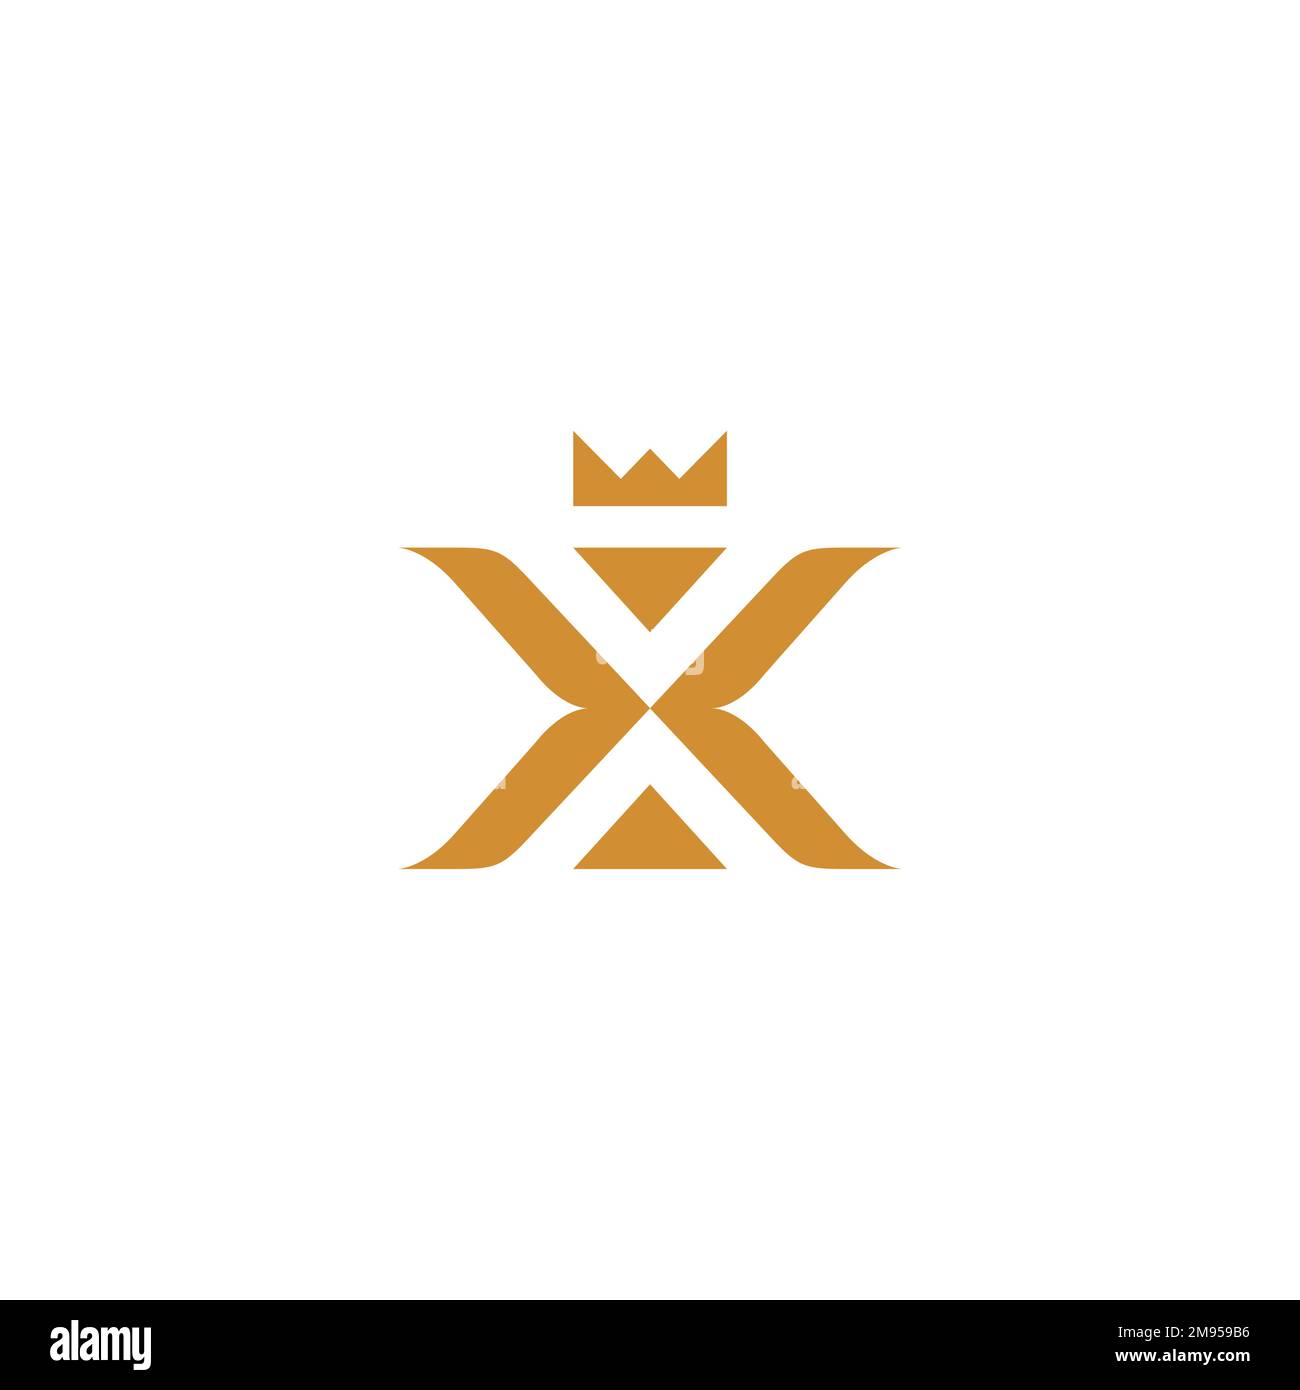 X Crown Logo Design With Gold Color Stock Vector